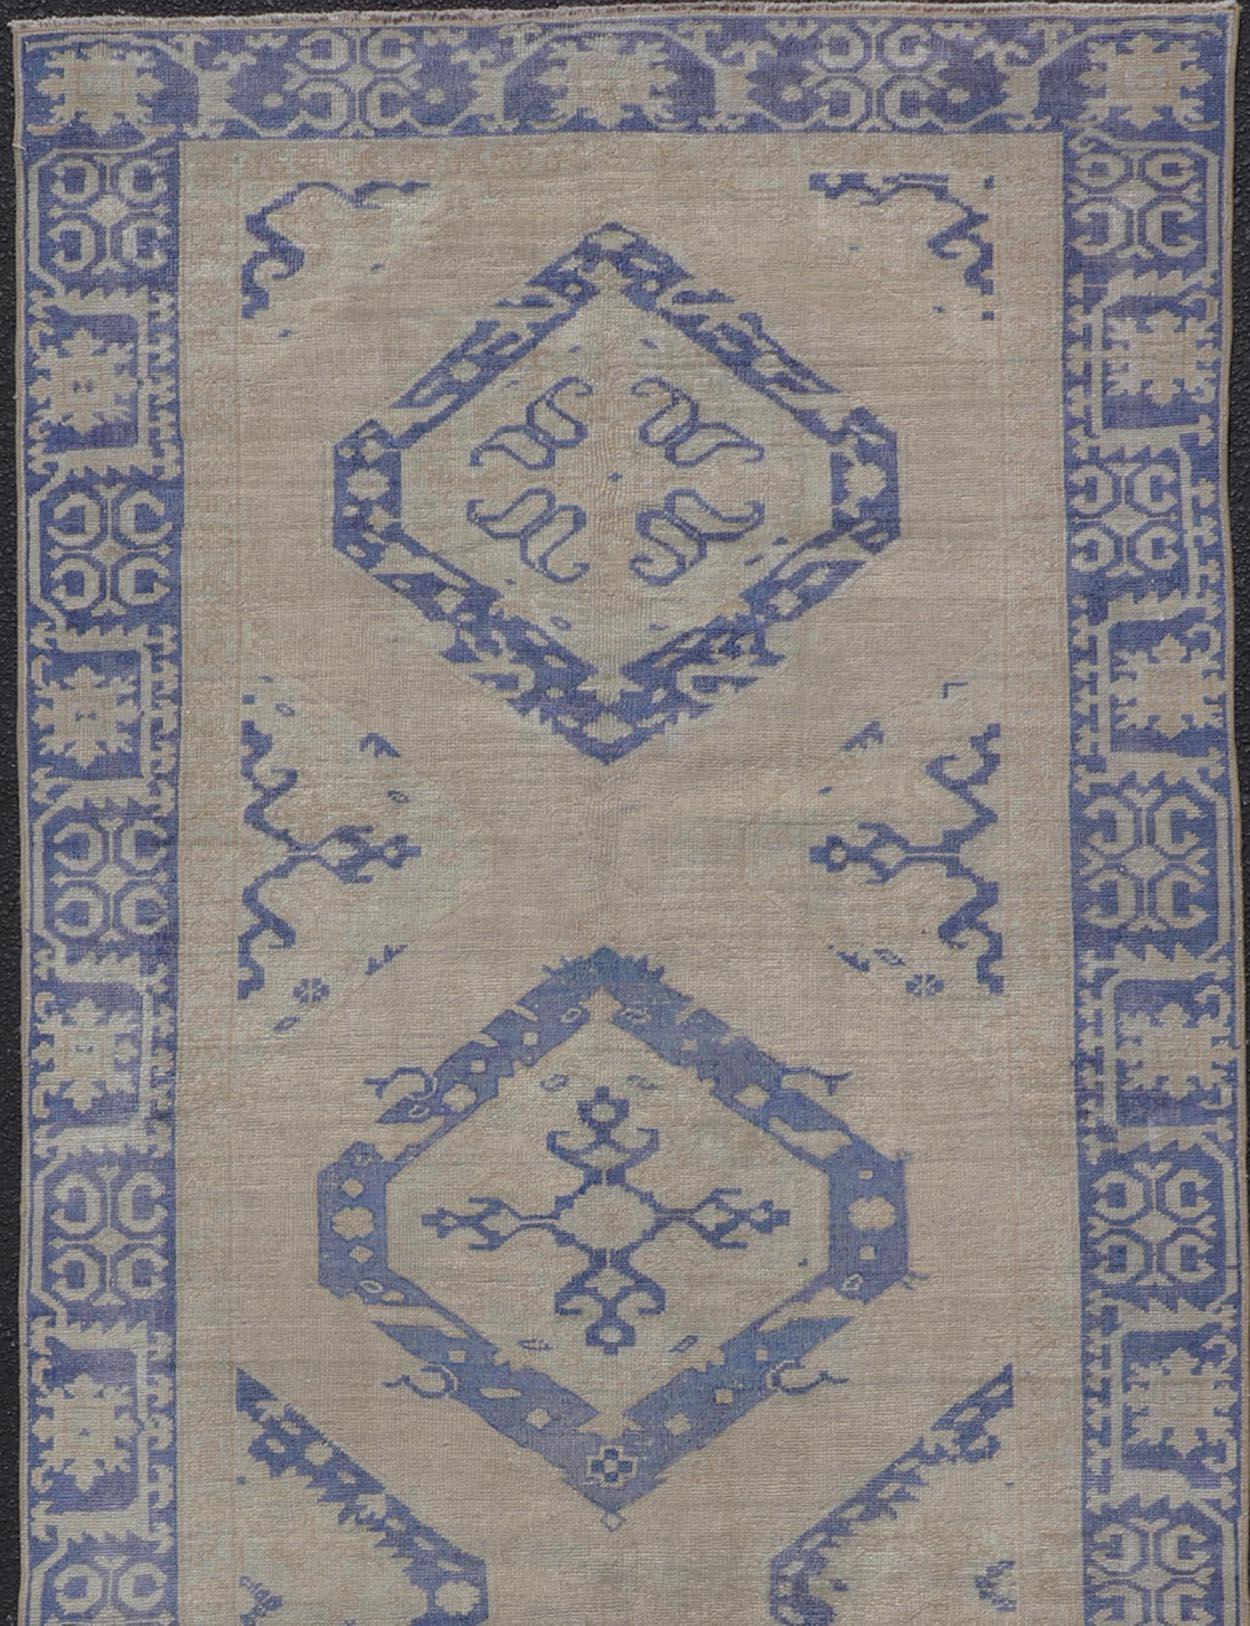 Measures: 4'6 x 12'6 

This vintage Oushak gallery runner features blue medallions on a sandy-taupe field. The border and central medallions are both rendered in a rich medium blue, as well as the border accents complimenting the field.